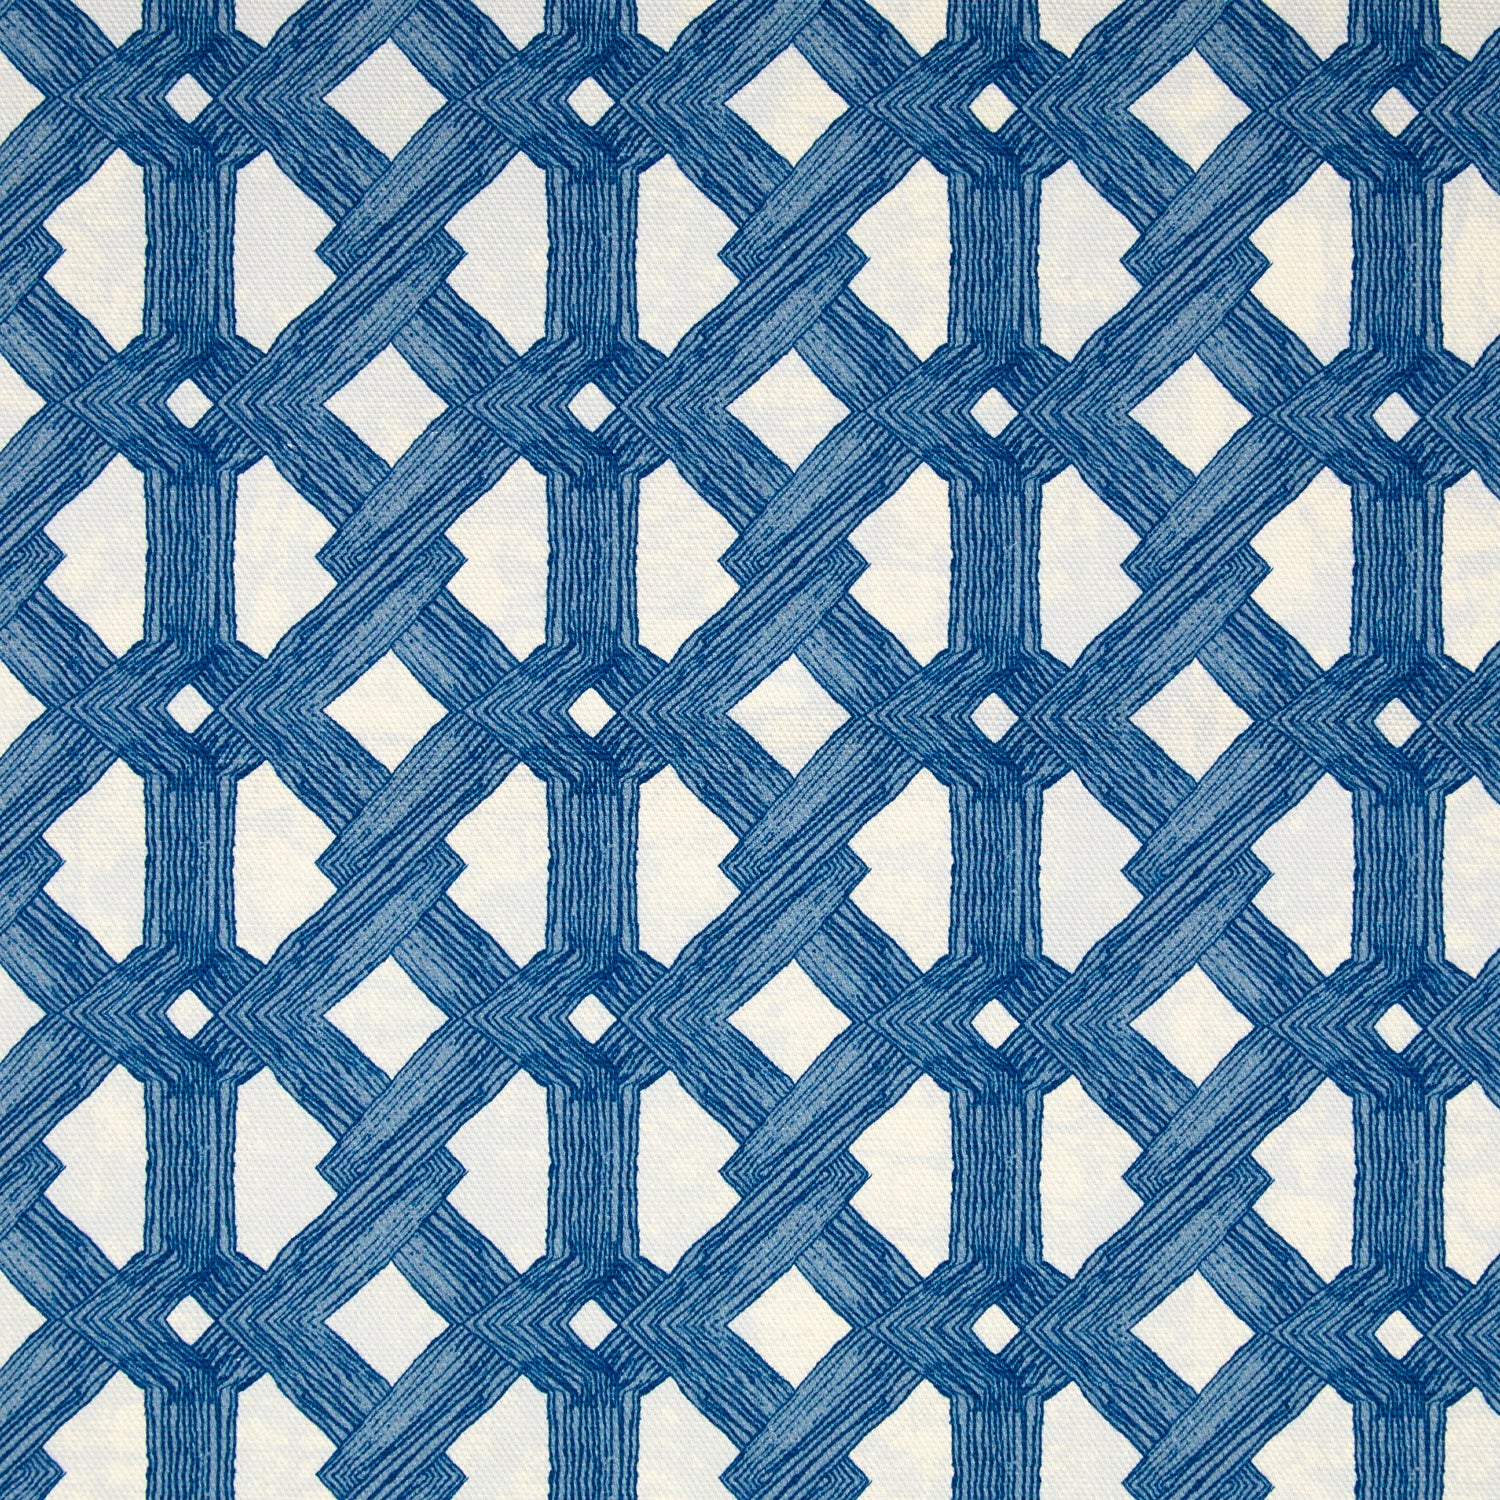 Detail of fabric in an intricate lattice print in navy on a cream field.